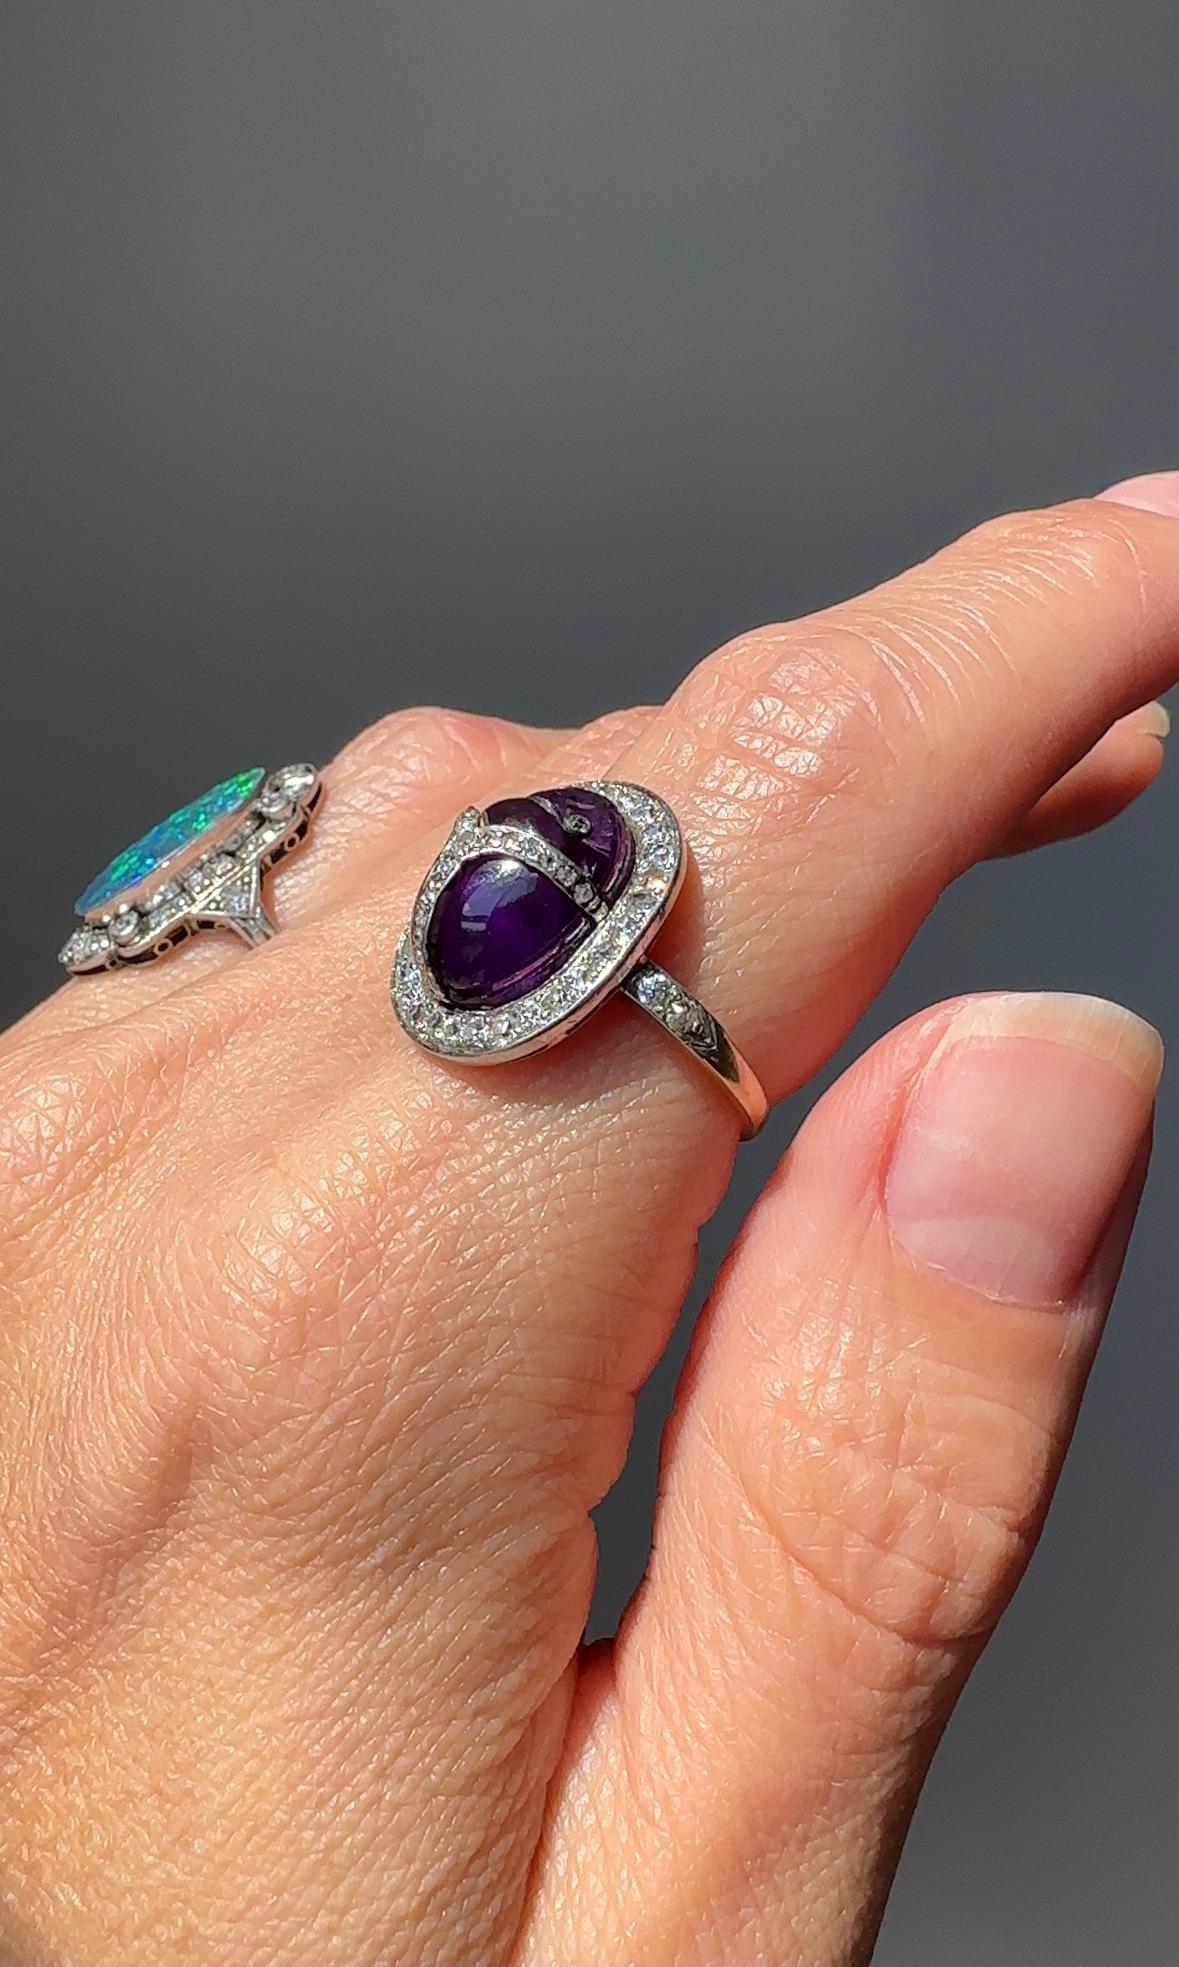 Egyptian revival jewelry became wildly popular during the Art Deco period after King Tut’s tomb was discovered in 1922. This insanely cool diamond eyed scarab is crafted from a juicy amethyst, outlined in shimmering single and rose-cut diamonds.